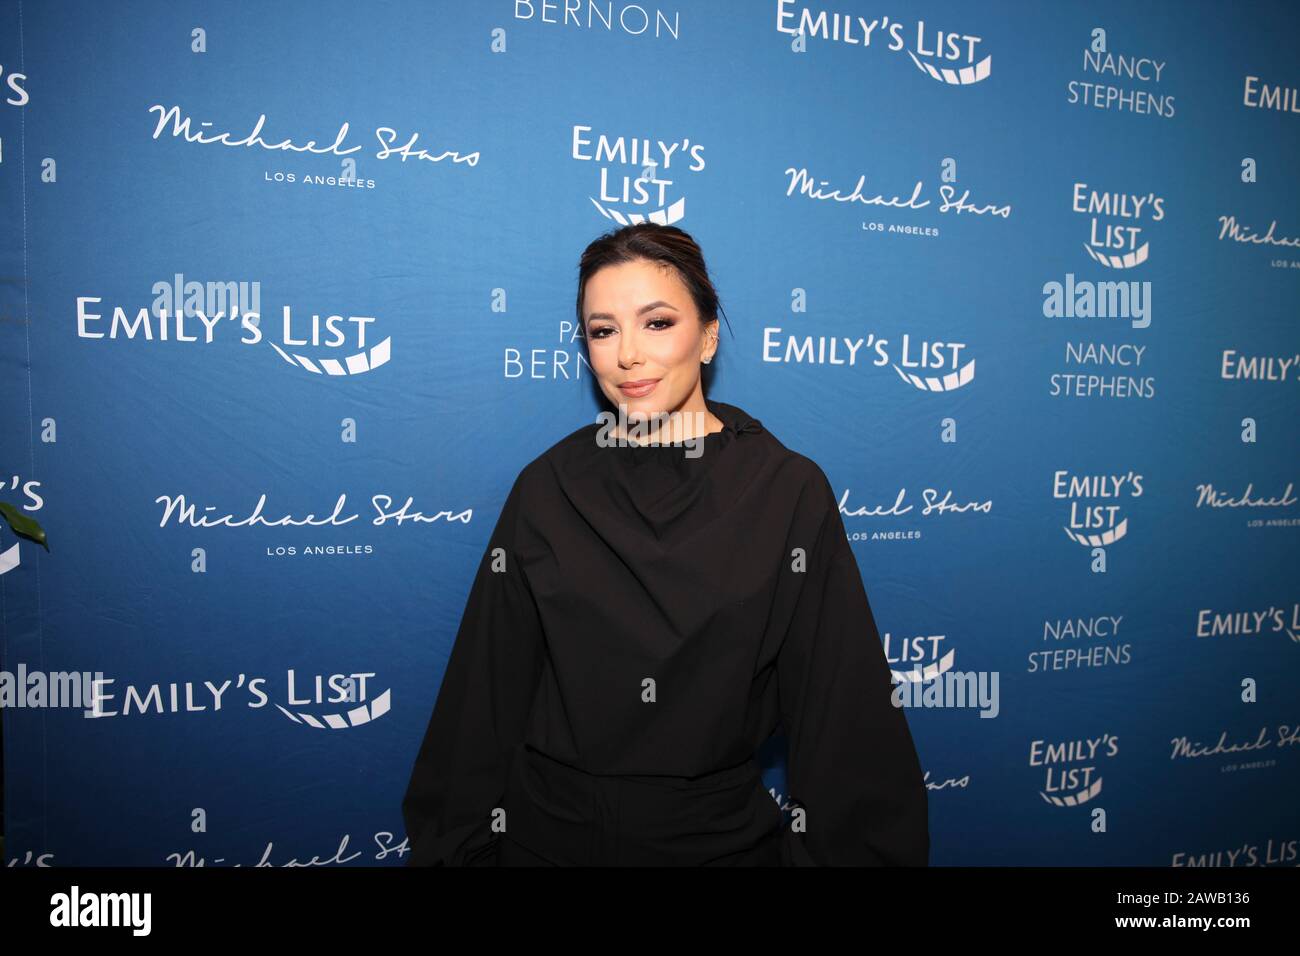 Actor Eva Longoria attends EMILY’s List Pre-Oscars panel discussion titled “Defining Women” on February 4th, 2020 in Los Angeles, California. Stock Photo